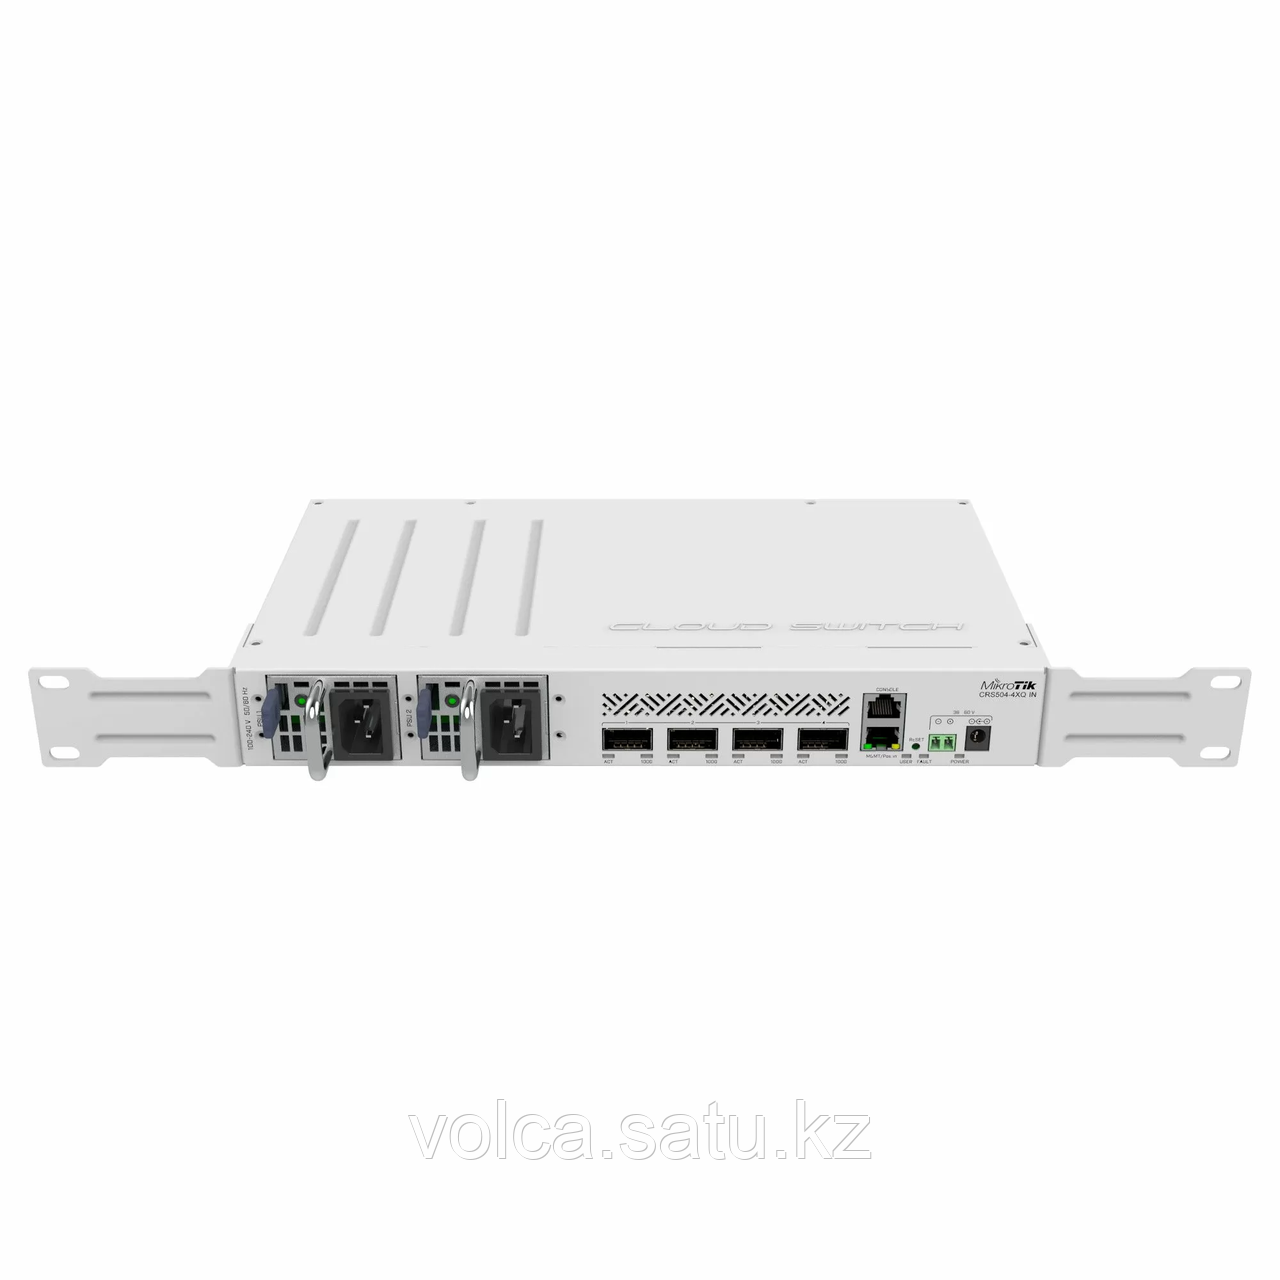 CRS504-4XQ-IN Cloud Router Switch, 1 порт 100Mbit Ethernet, 4 порта 100G QSFP28, RouterOS v7